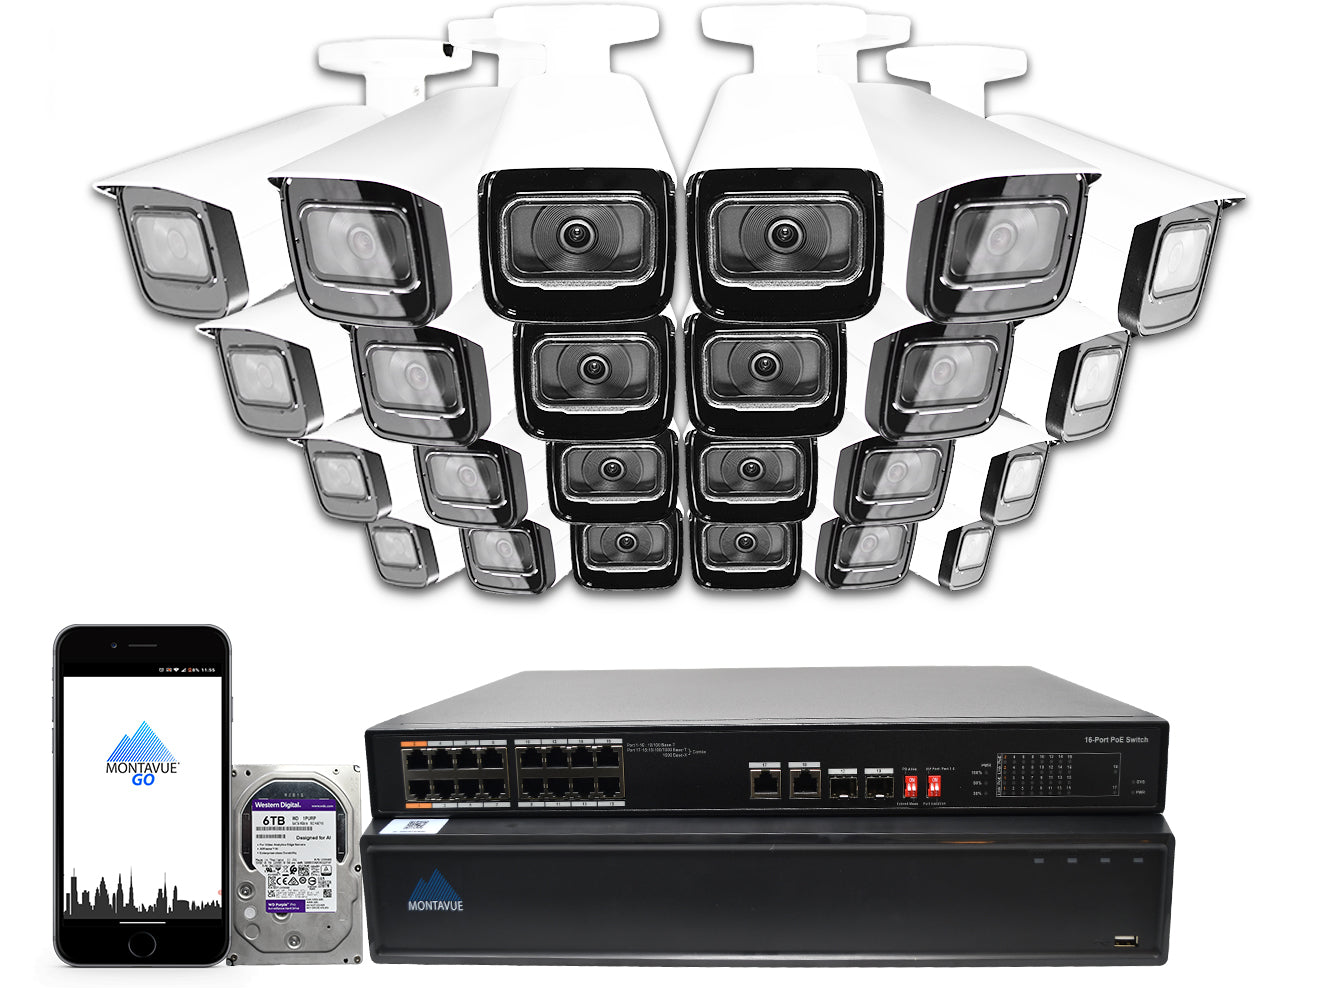 MTB8110 Package | 4K Acupick Bullet Cameras and 32 Channel 5 Series AI NVR with 6TB HDD - Montavue